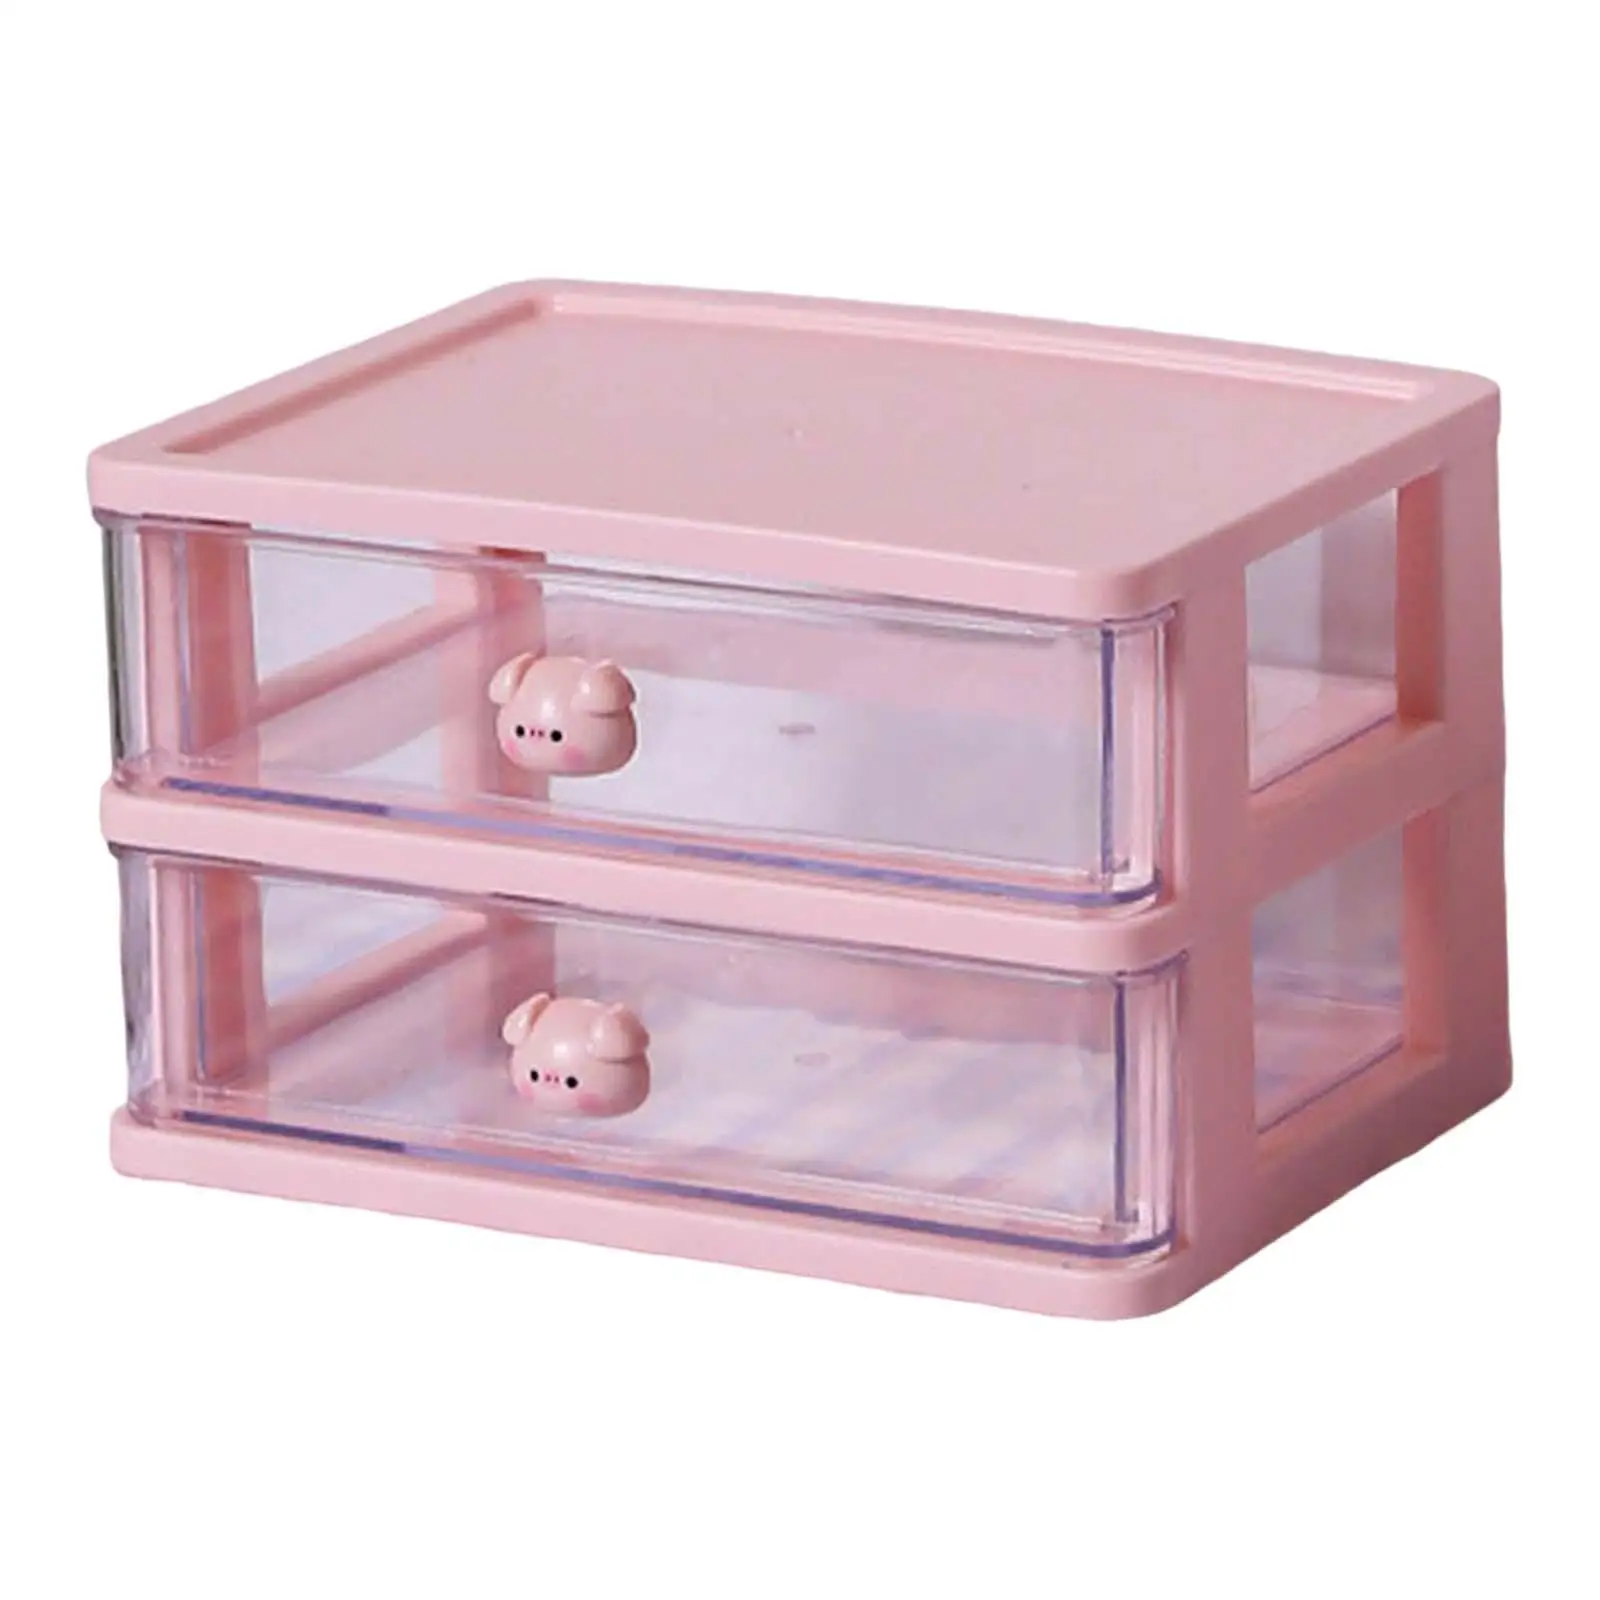 Desk Organizer with Drawer Stackable Office Tabletop Organization Multifunctional Cosmetic Organiser Case for Bathroom Home Dorm